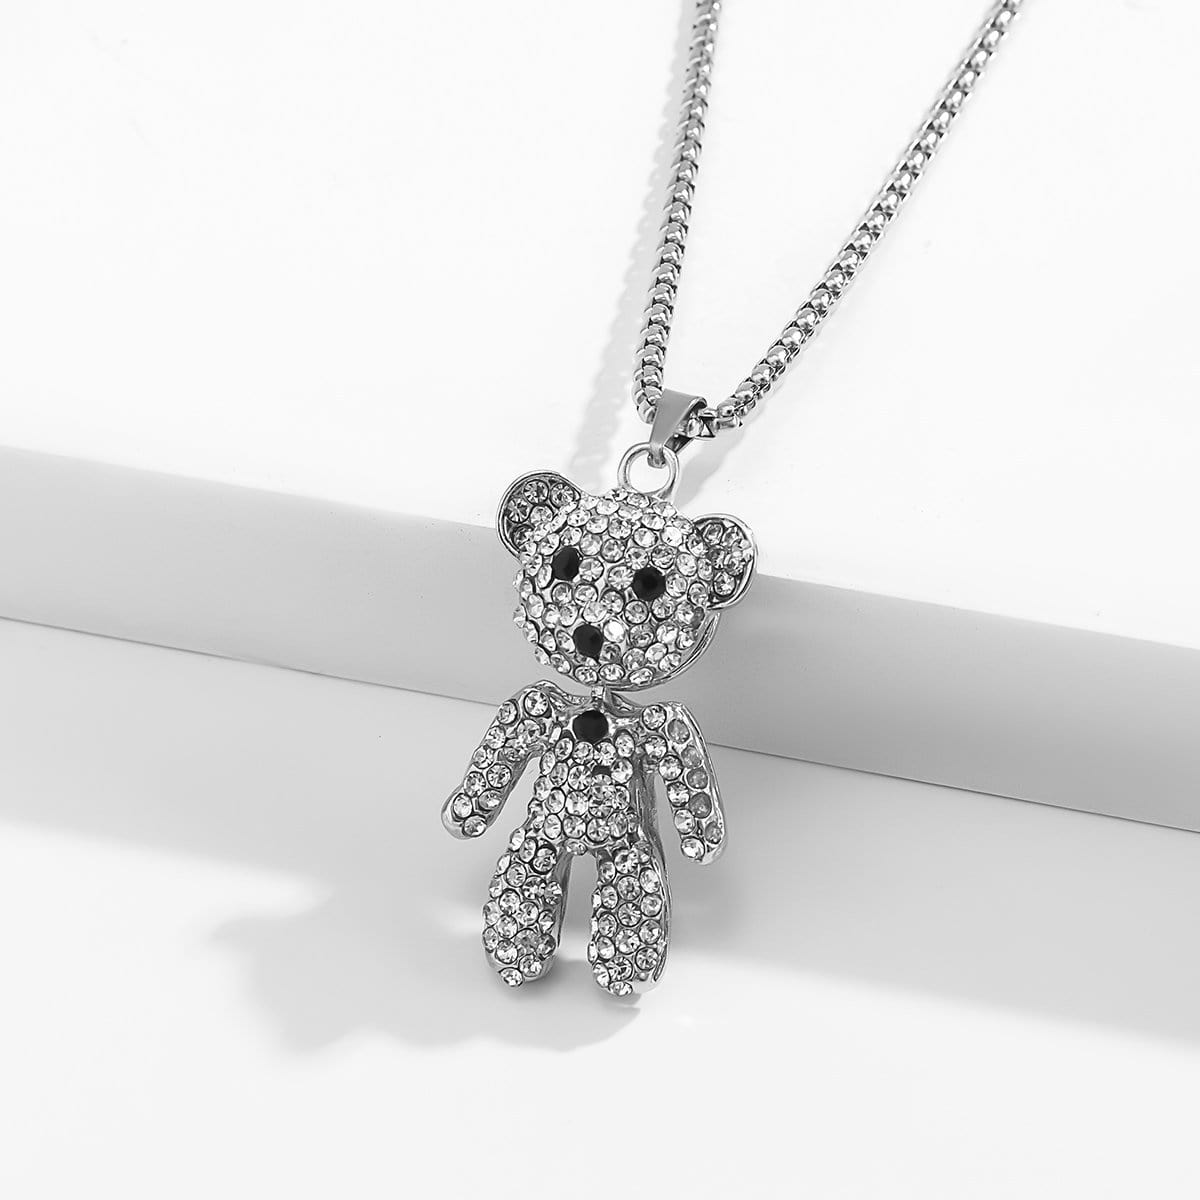 Stainless Steel Iced Out Teddy Bear Pendant Sweater Chain Necklace - ArtGalleryZen